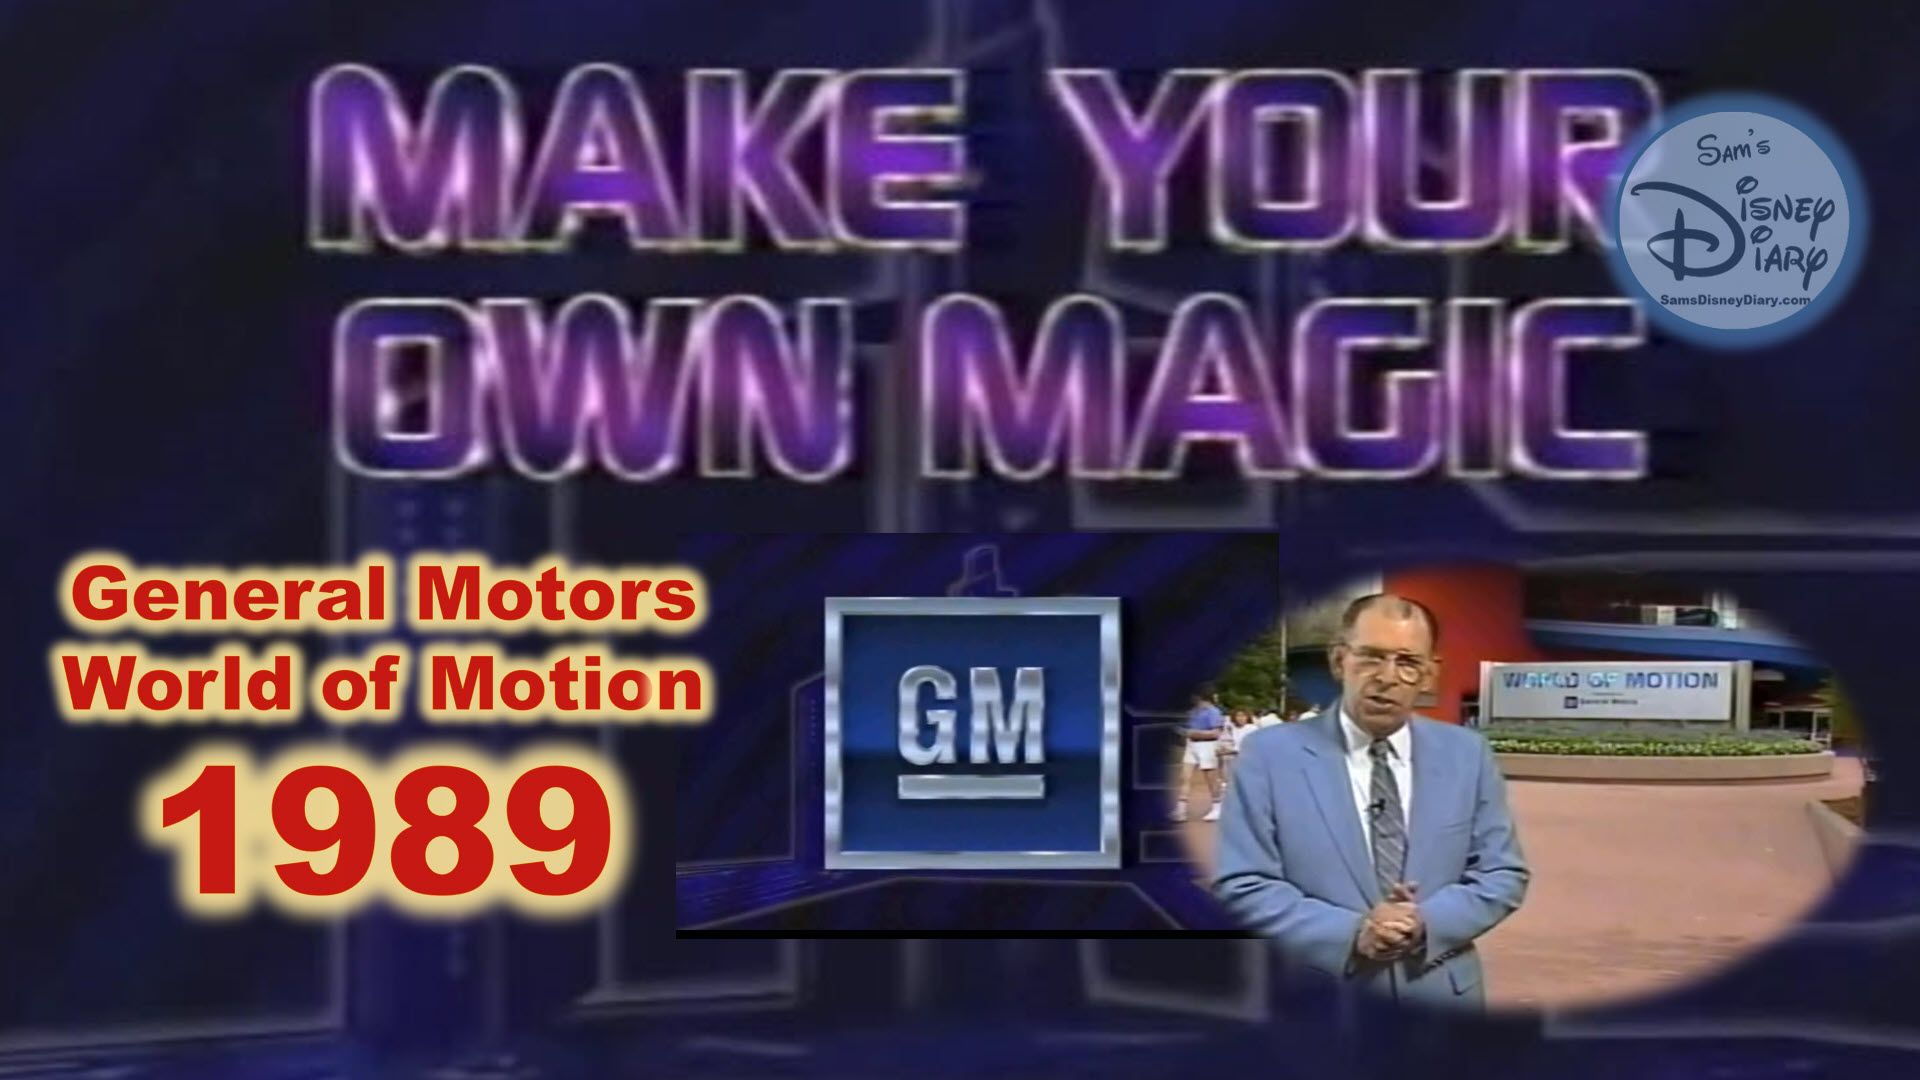 General Motors: Make Your Own Magic: World of Motion (1989)